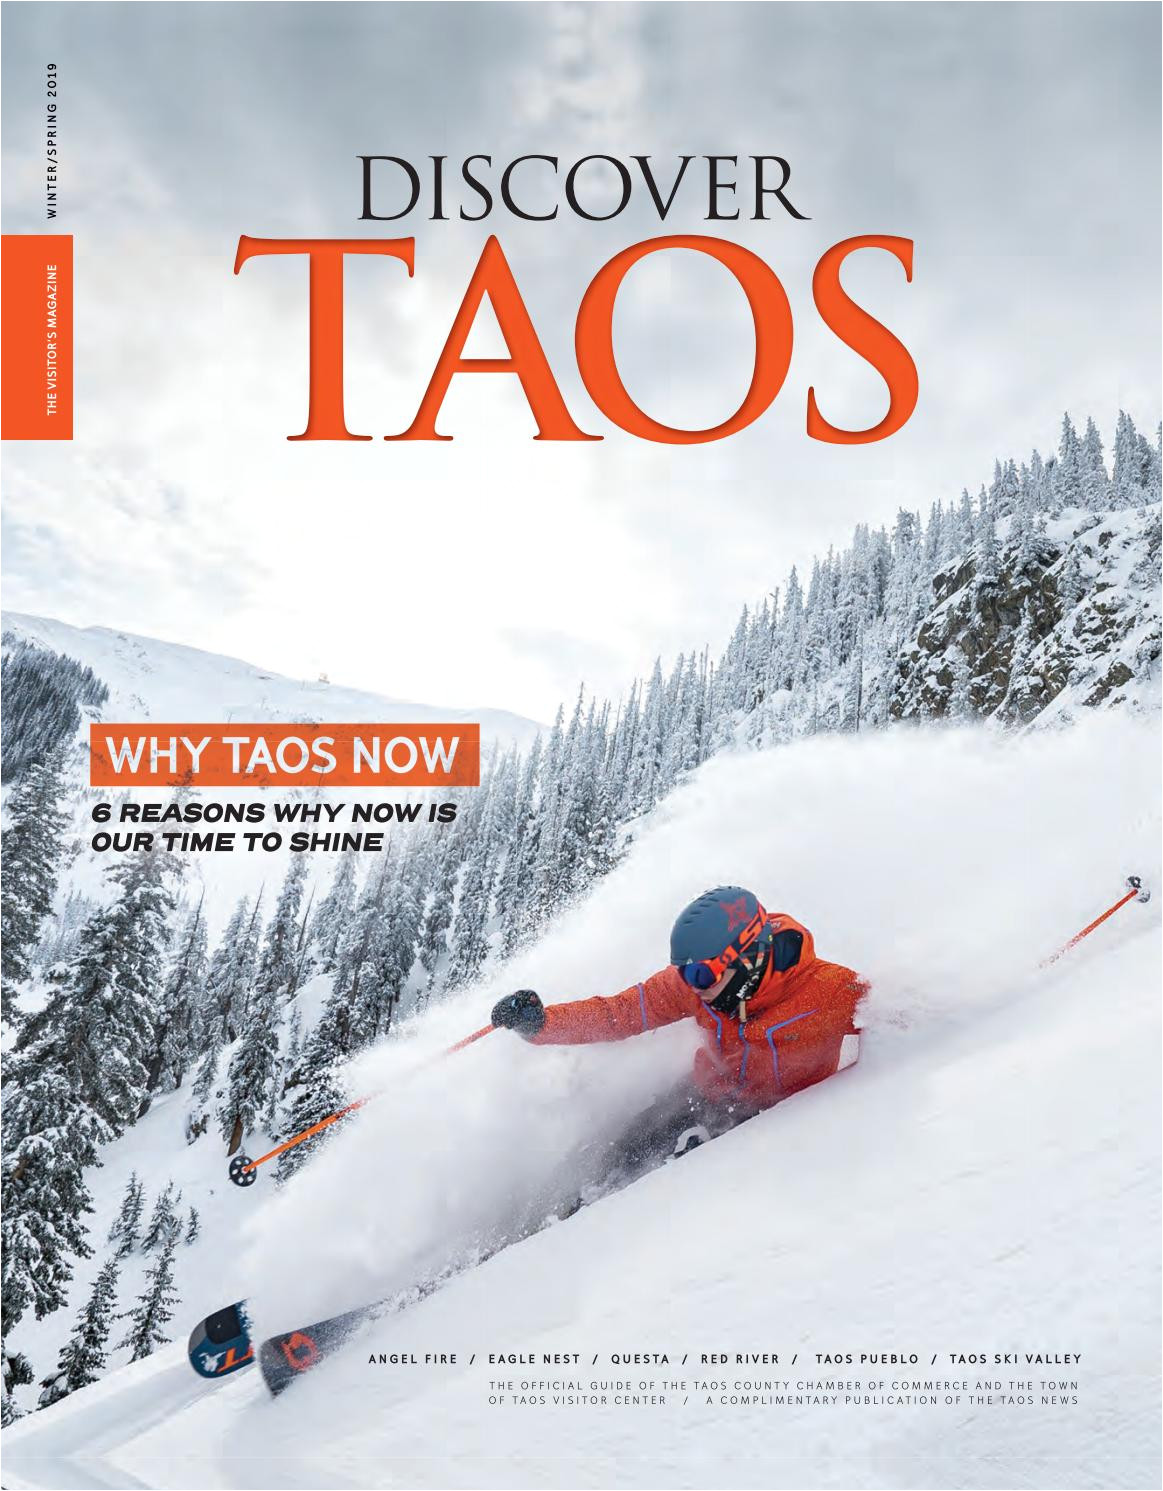 Red River Nm Upcoming events Discover Taos Winter 2018 2019 by the Taos News issuu